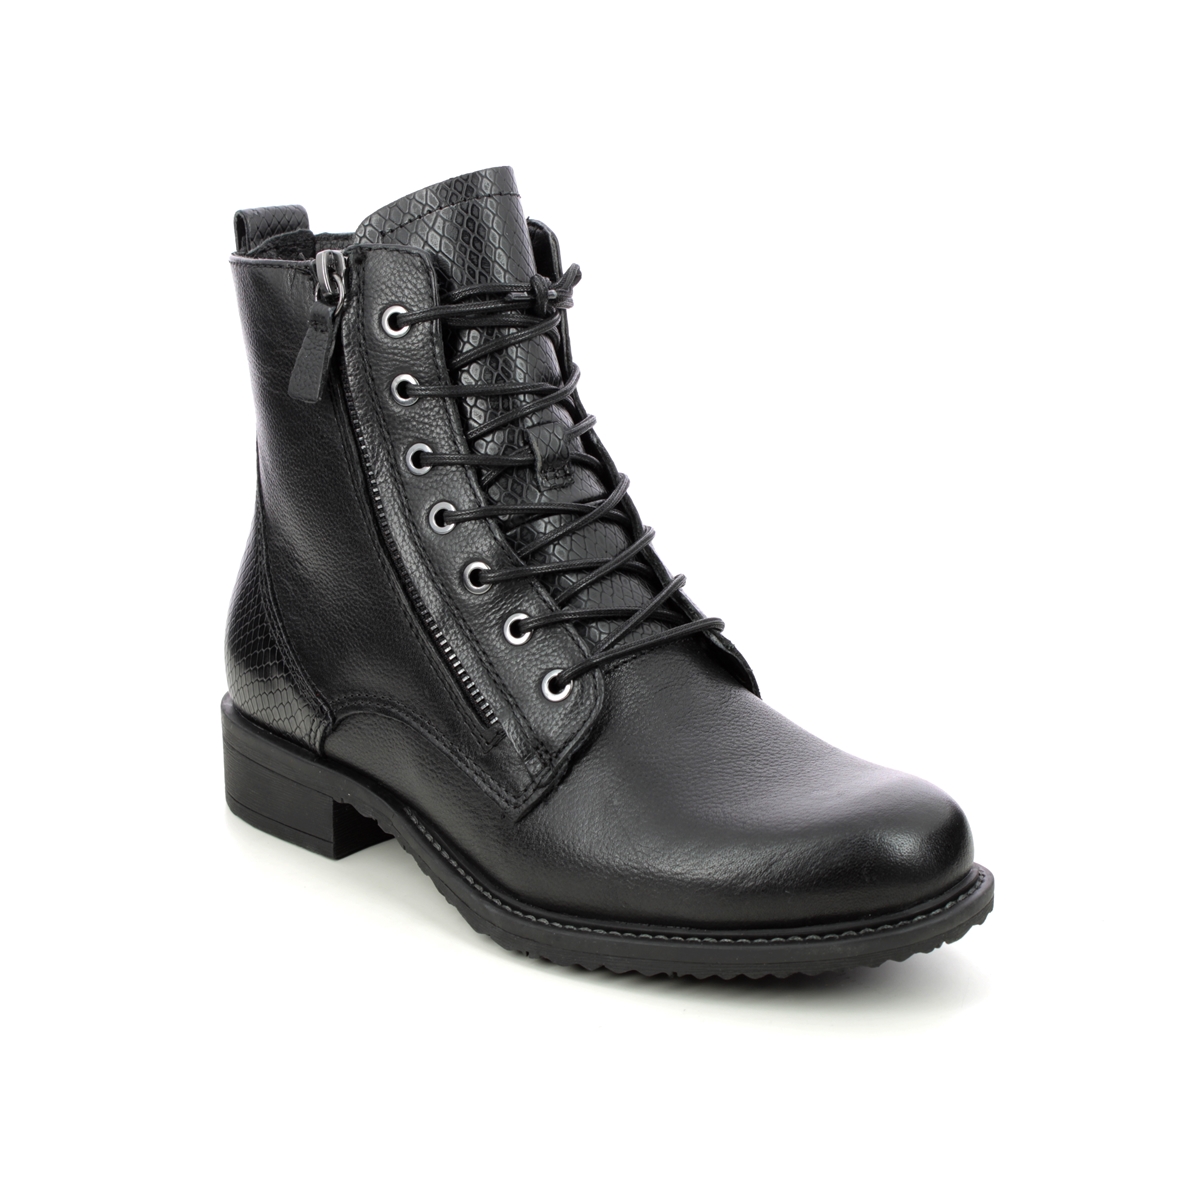 Tamaris Anouk Zip Ronja Black Leather Womens Lace Up Boots 25211-29-074 In Size 38 In Plain Black Leather